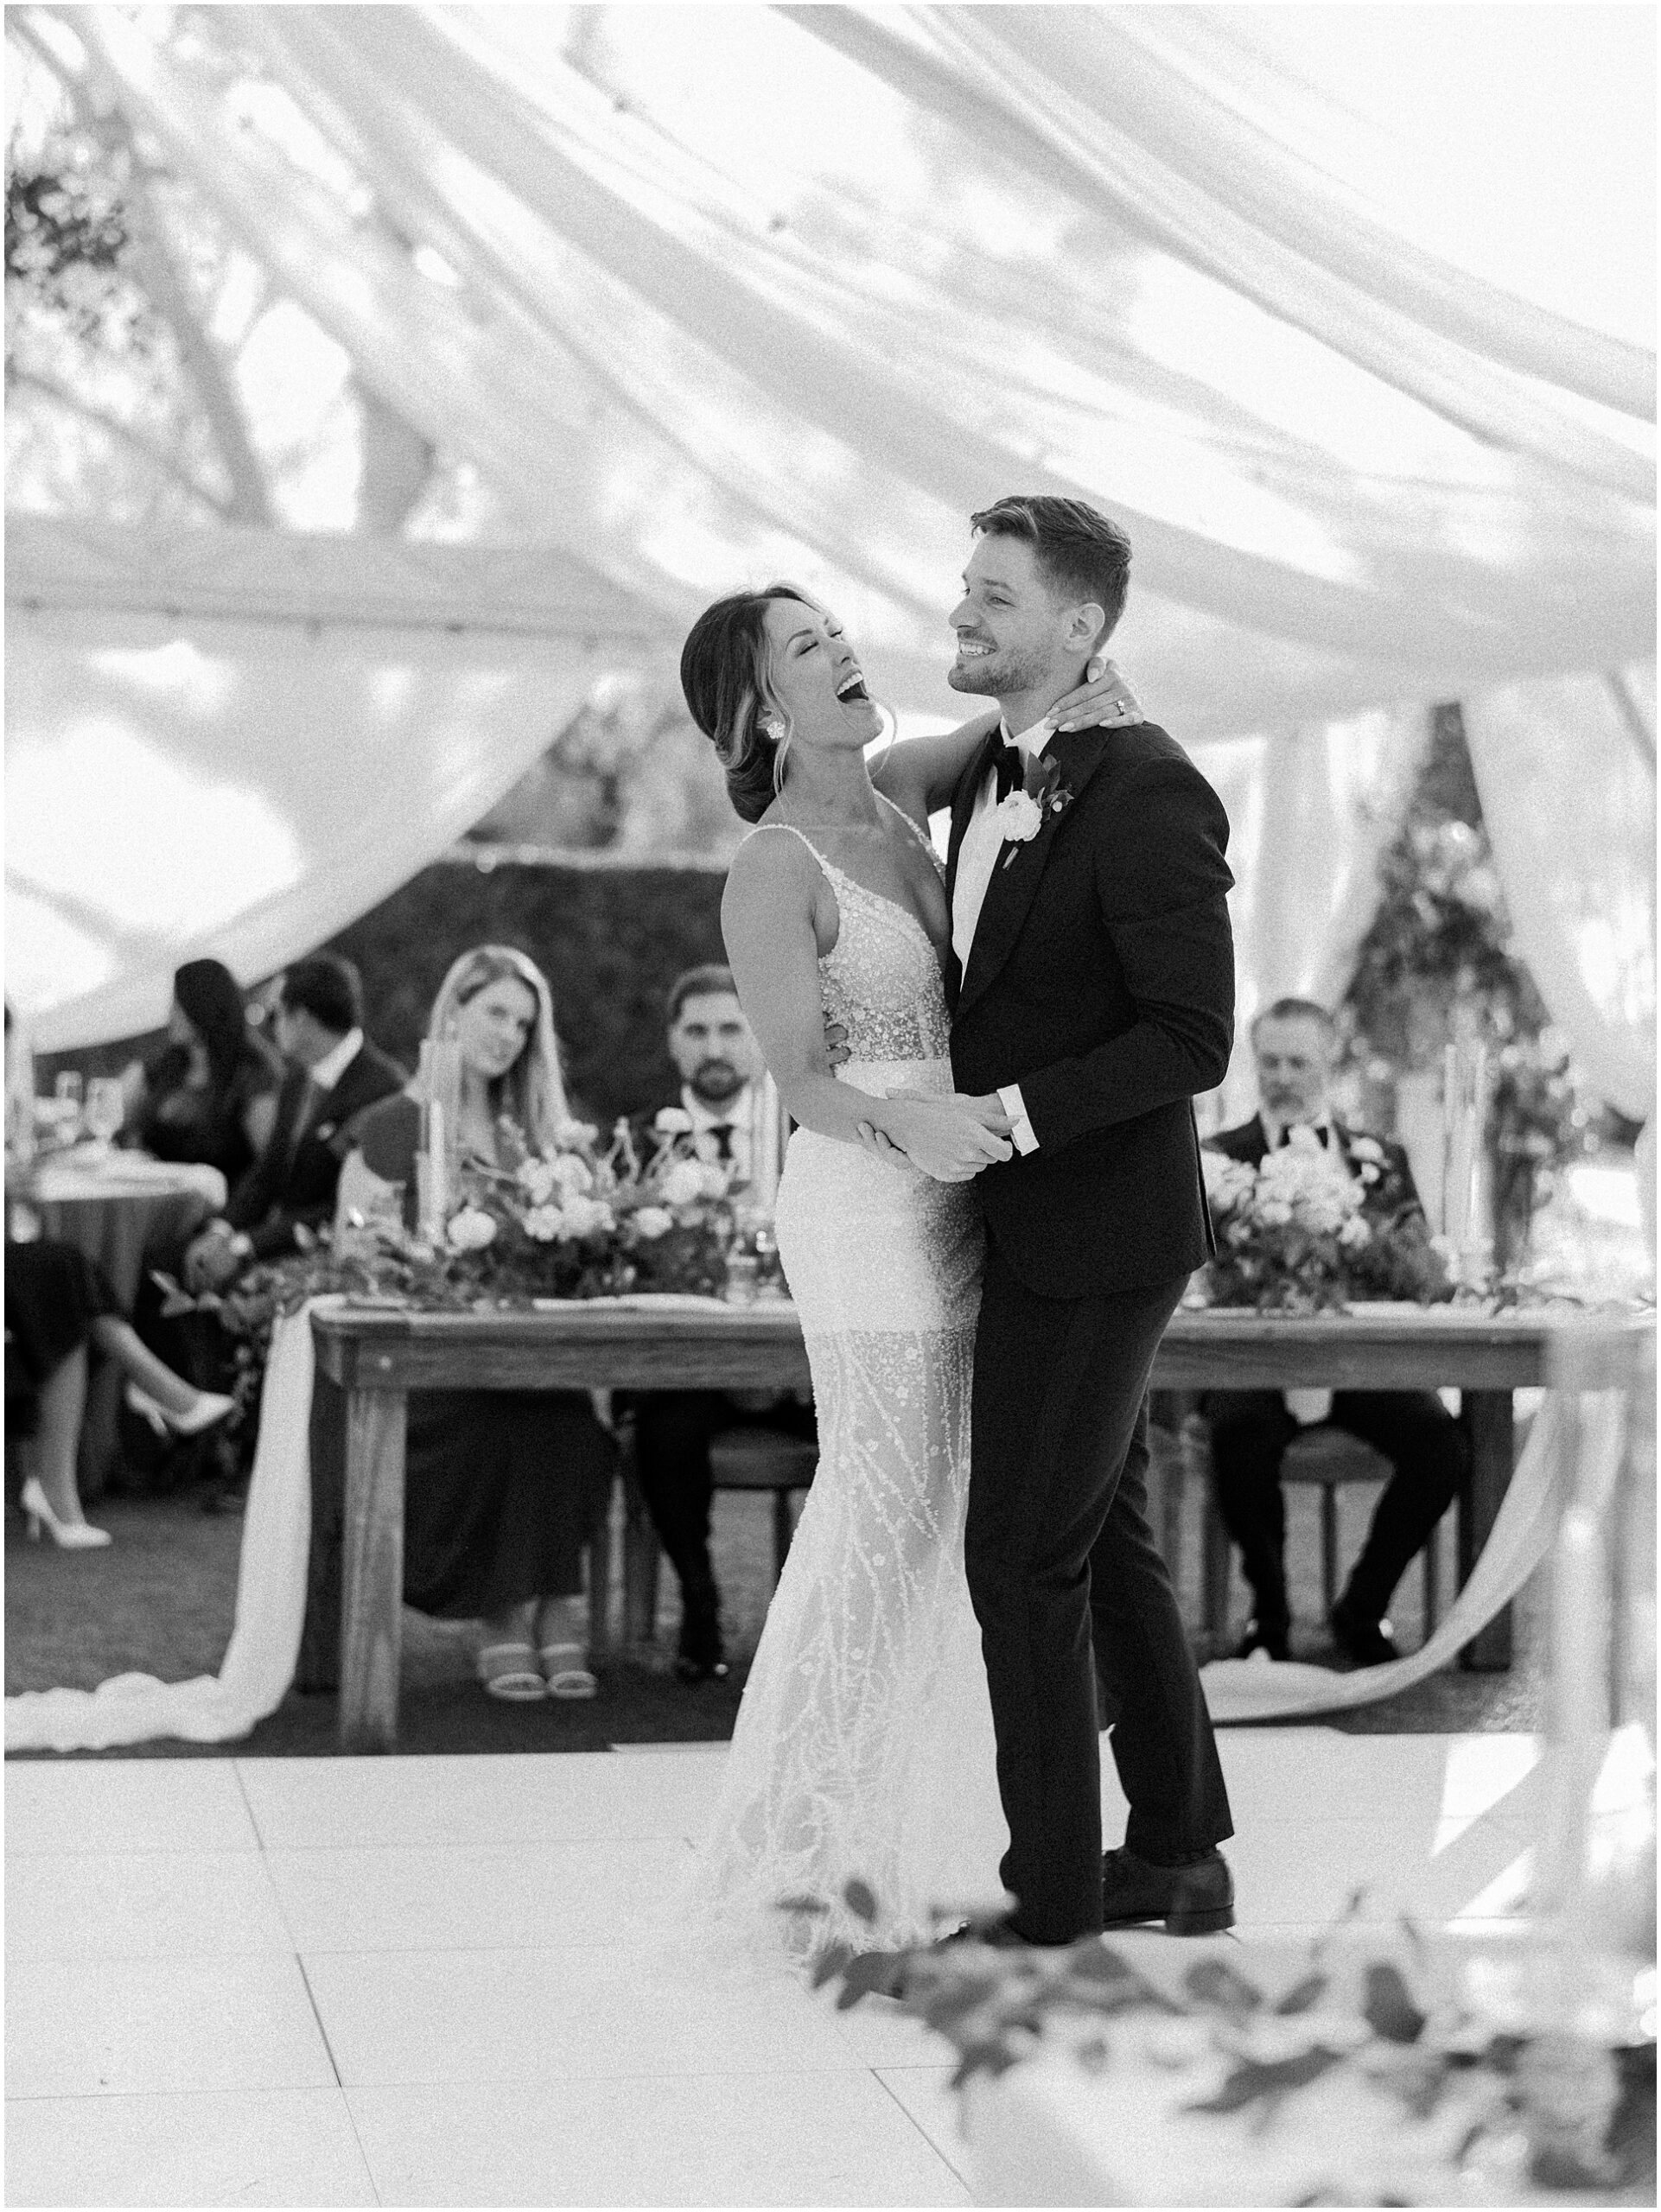 a Candid moment between husband and wife dancing at their wedding reception in black and white